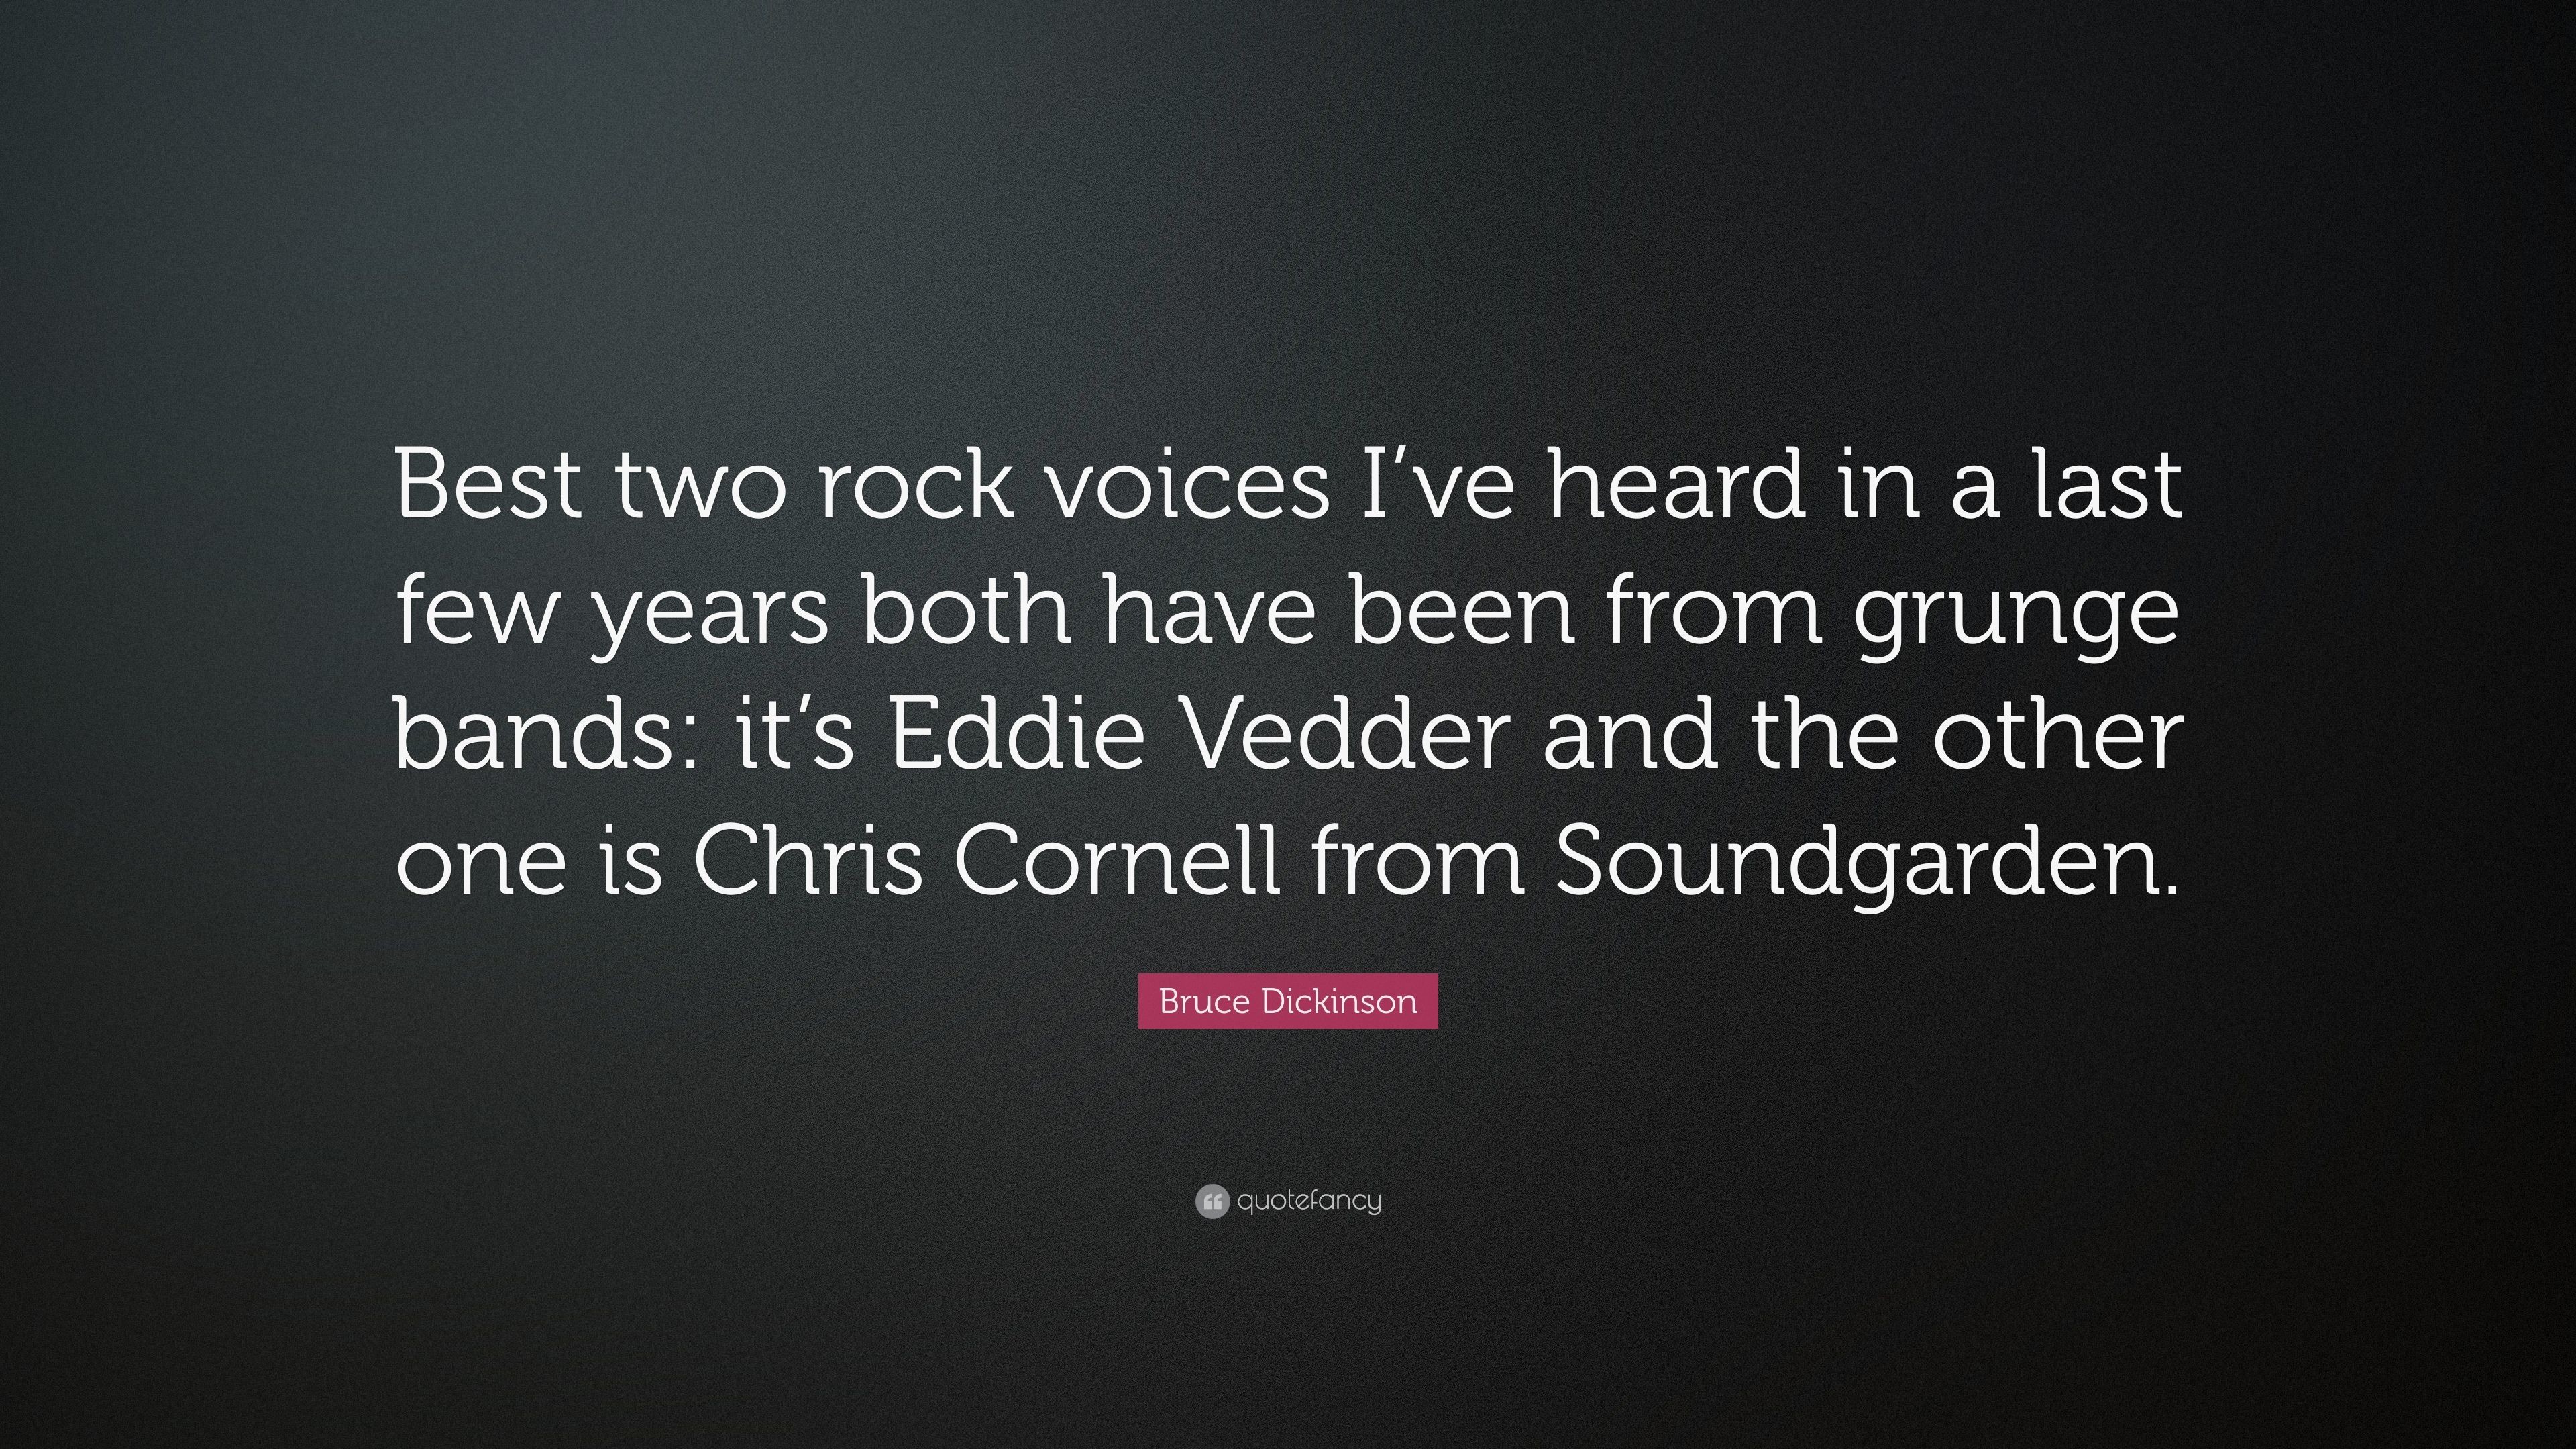 3840x2160 Bruce Dickinson Quote: “Best two rock voices I've heard in a last